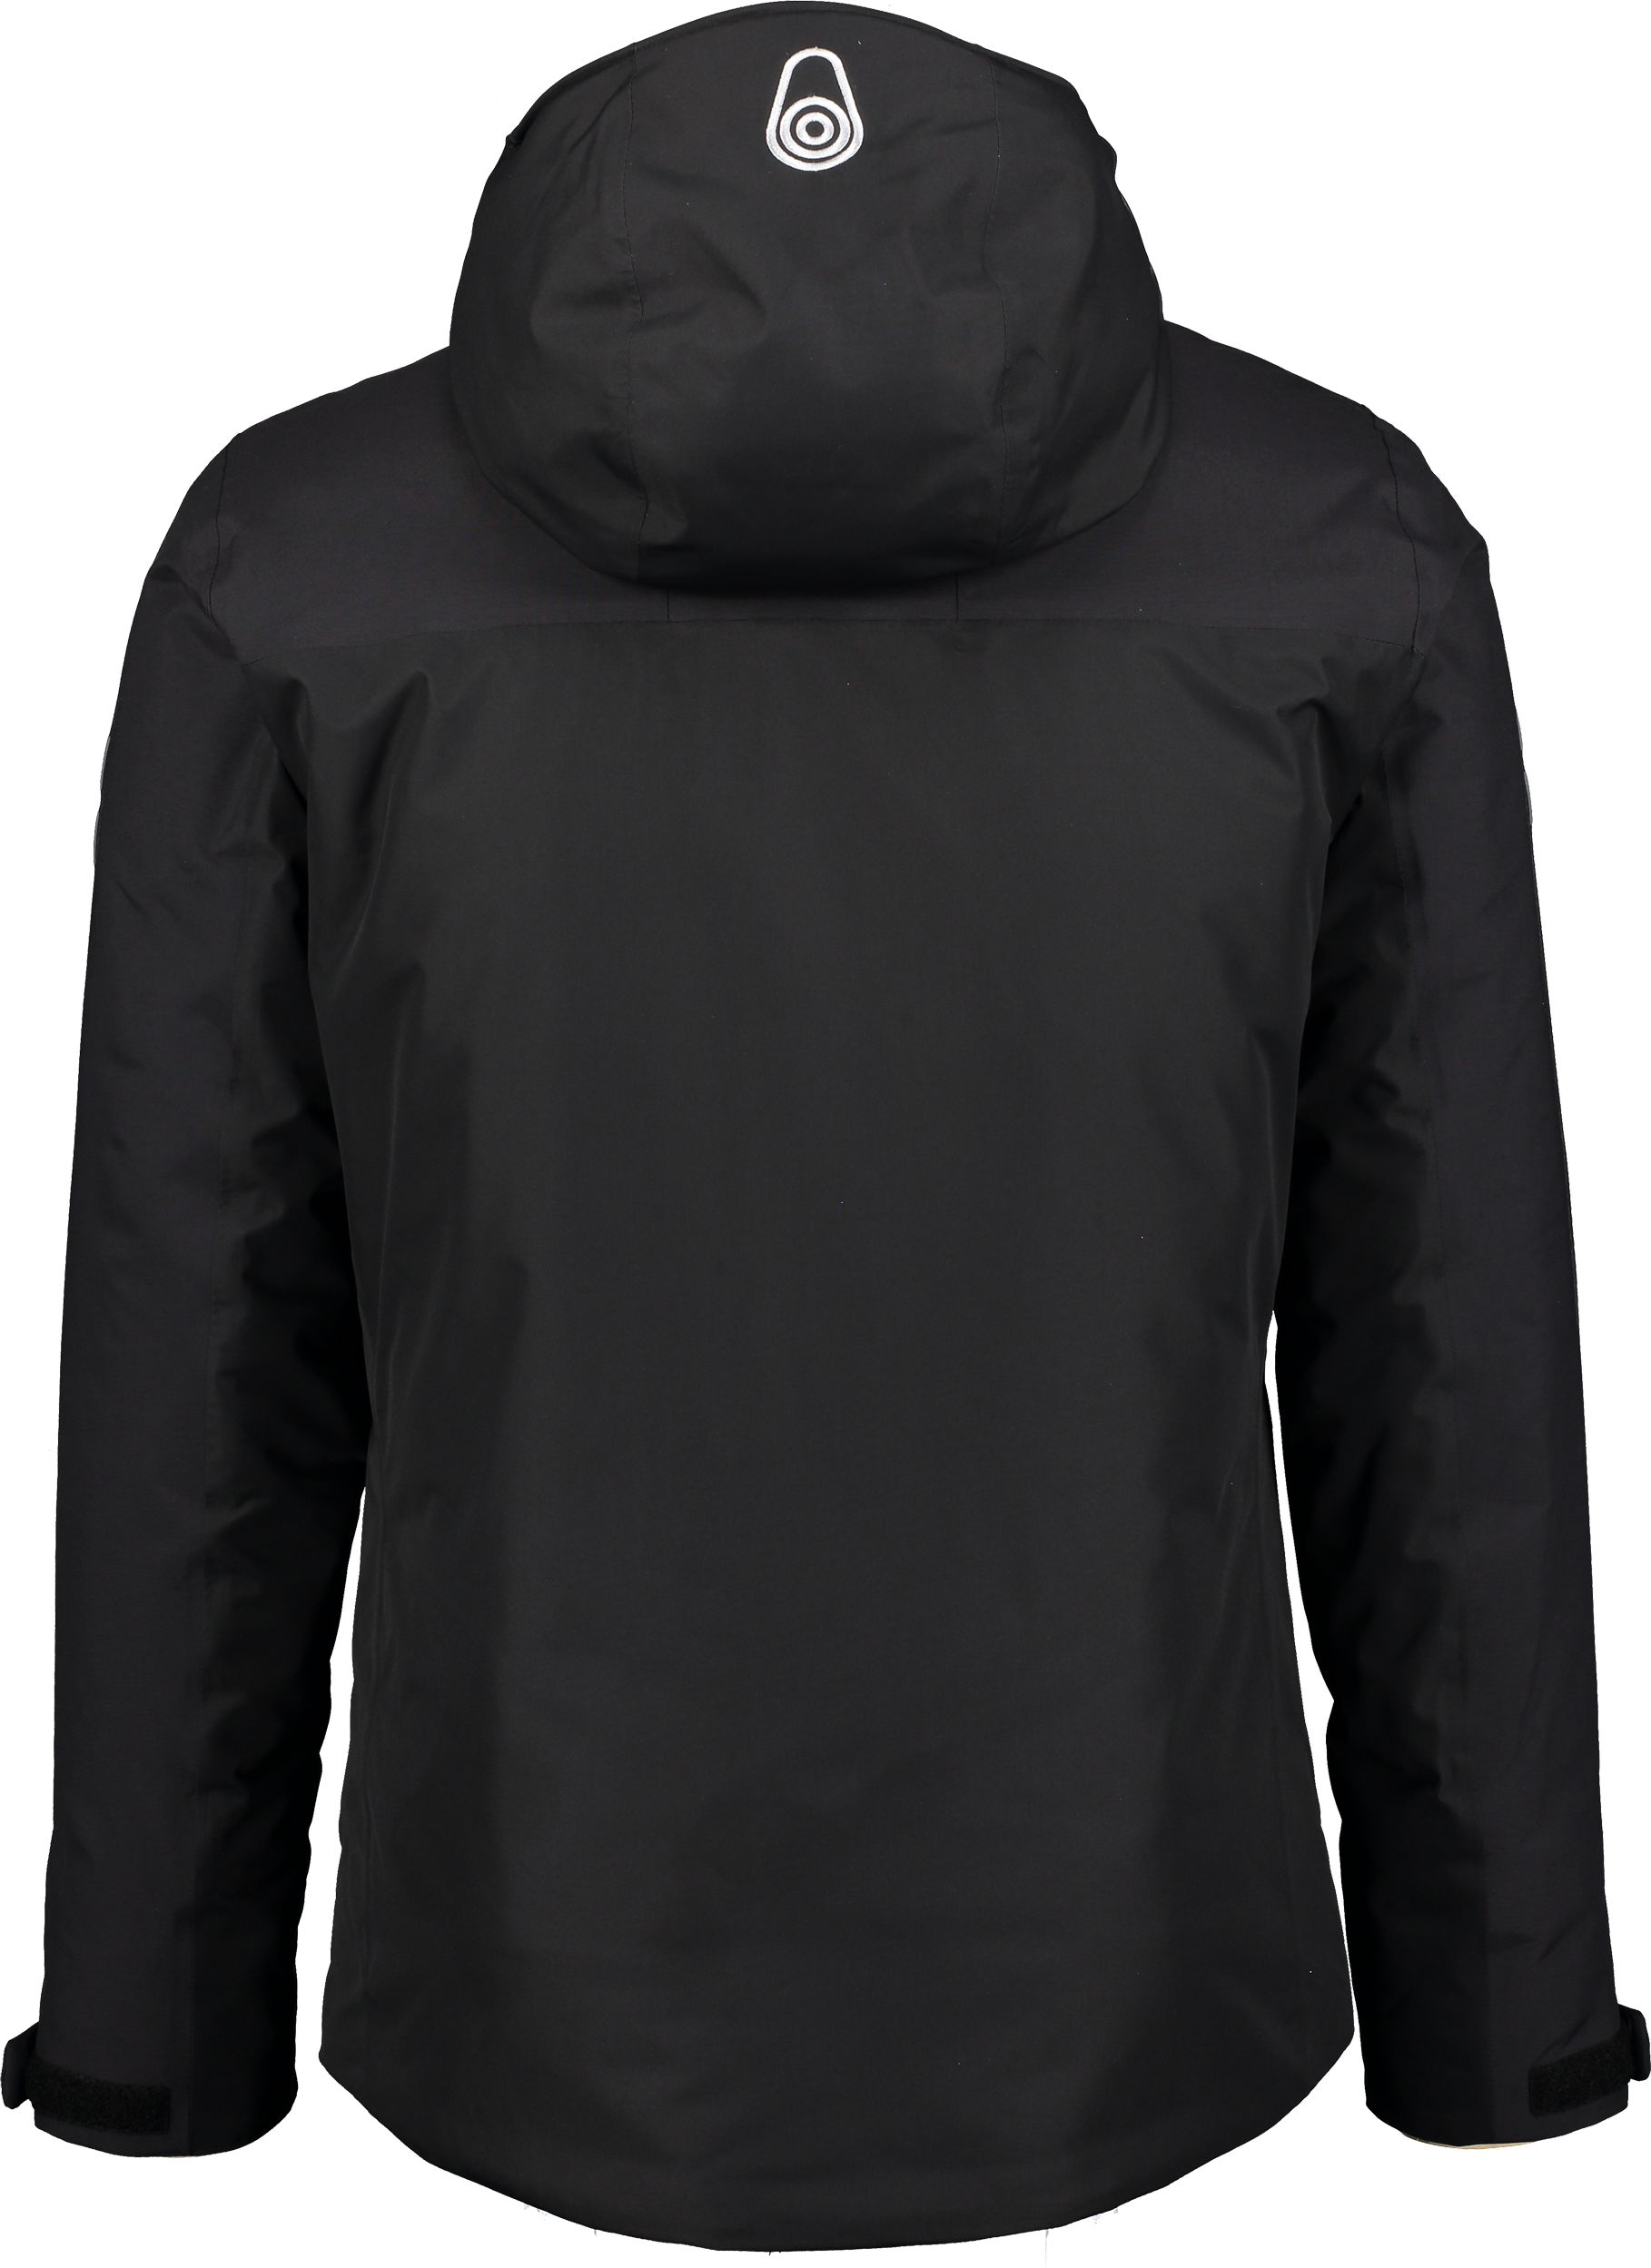 SAIL RACING, M CAPE INSULATED JKT